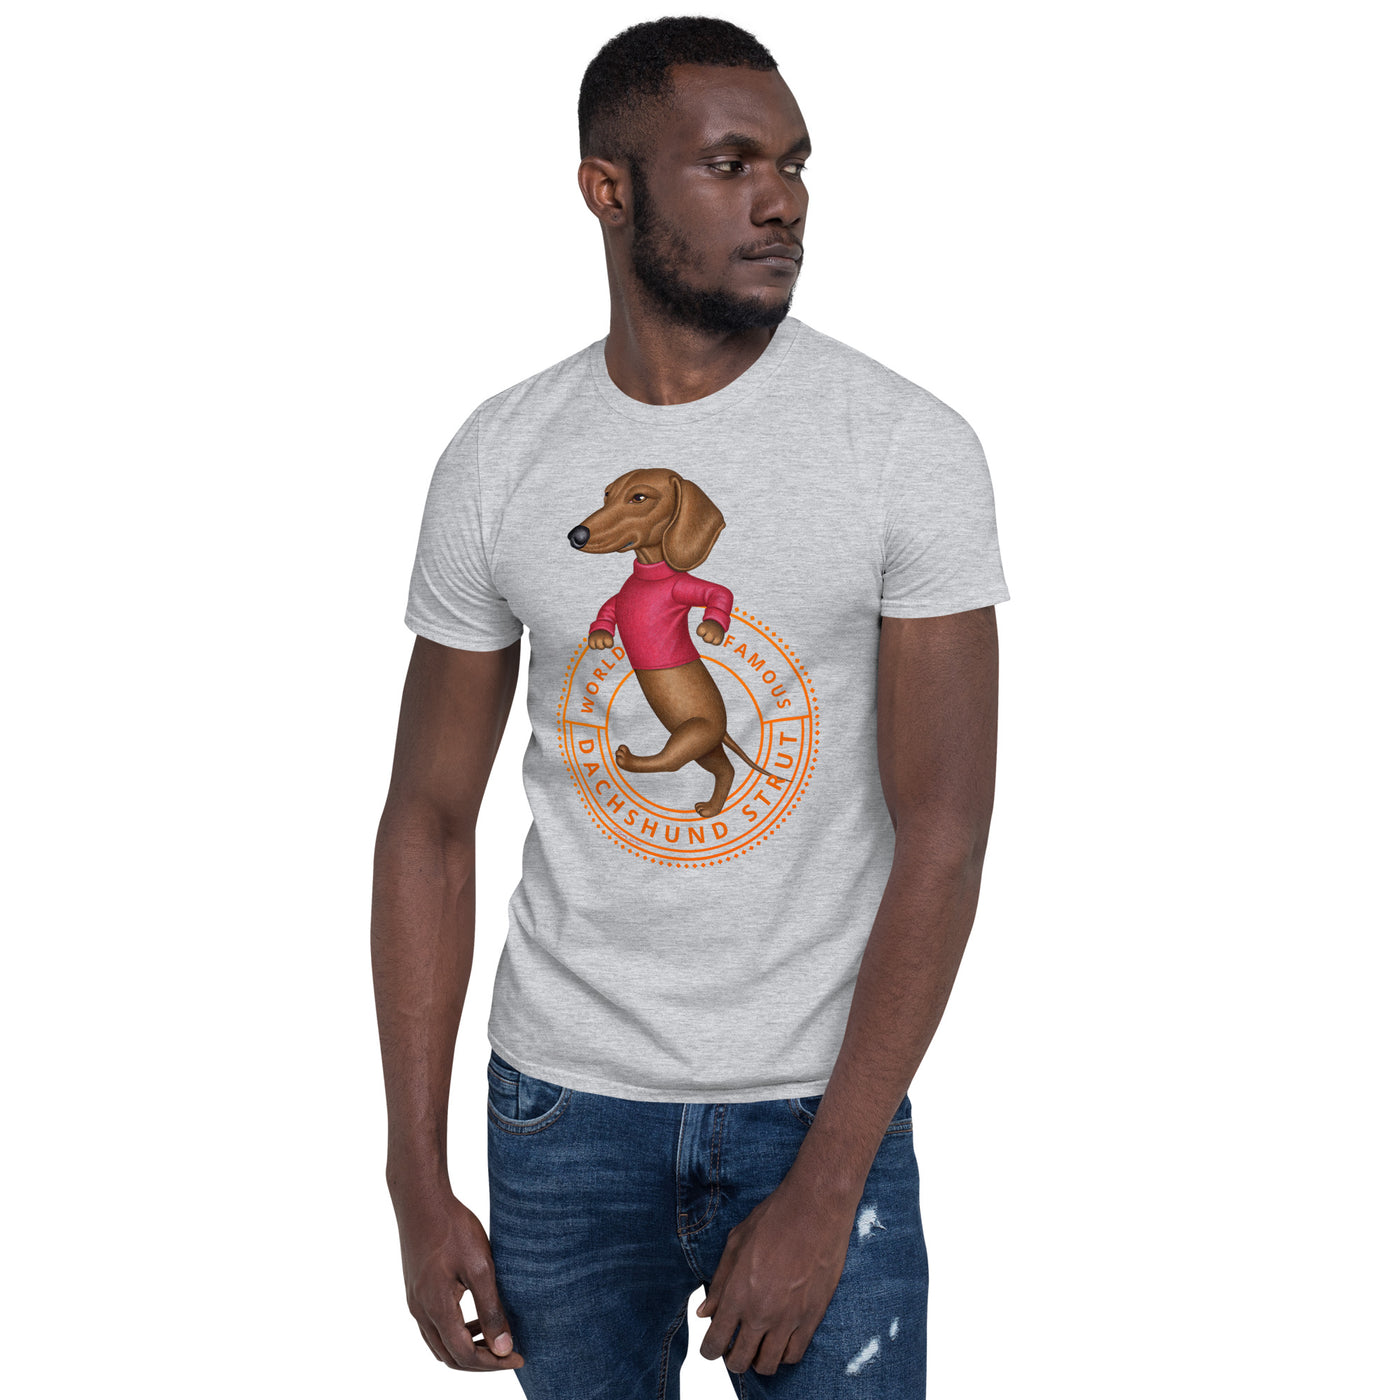 Cute Funny Doxie Dog on a Dachshund World Famous Doxie Strut Unisex T-Shirt